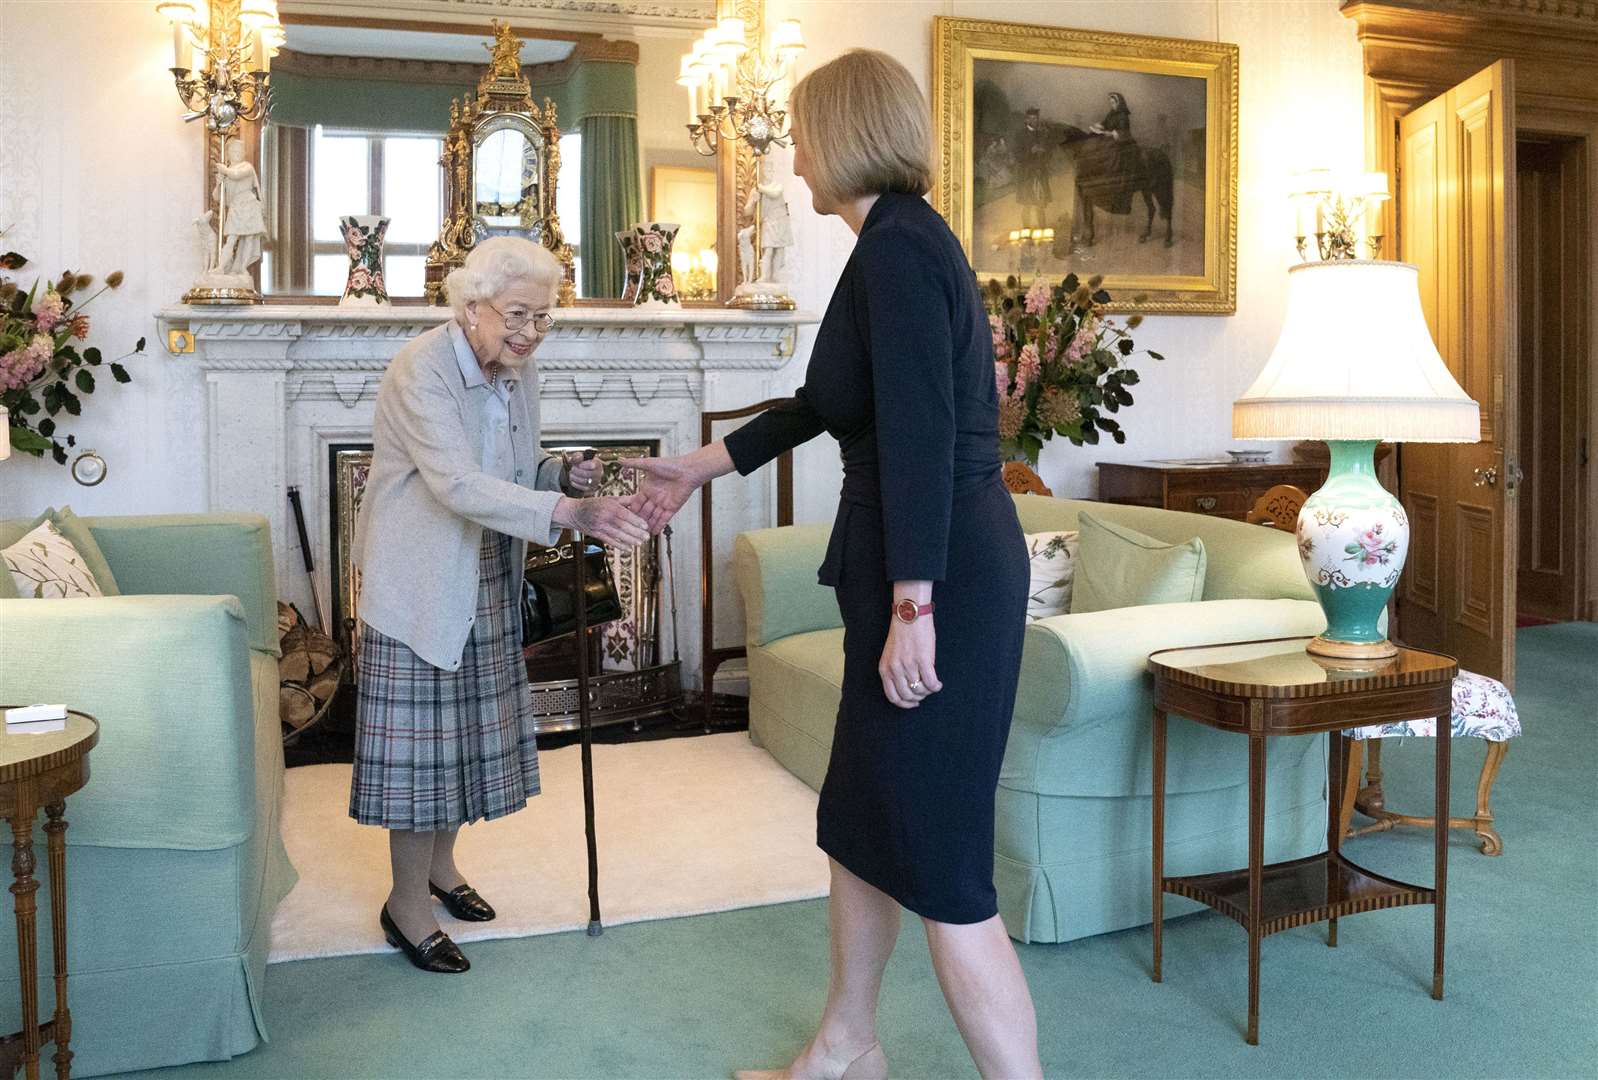 The Queen welcoming Liz Truss during the audience at Balmoral (Jane Barlow/PA)